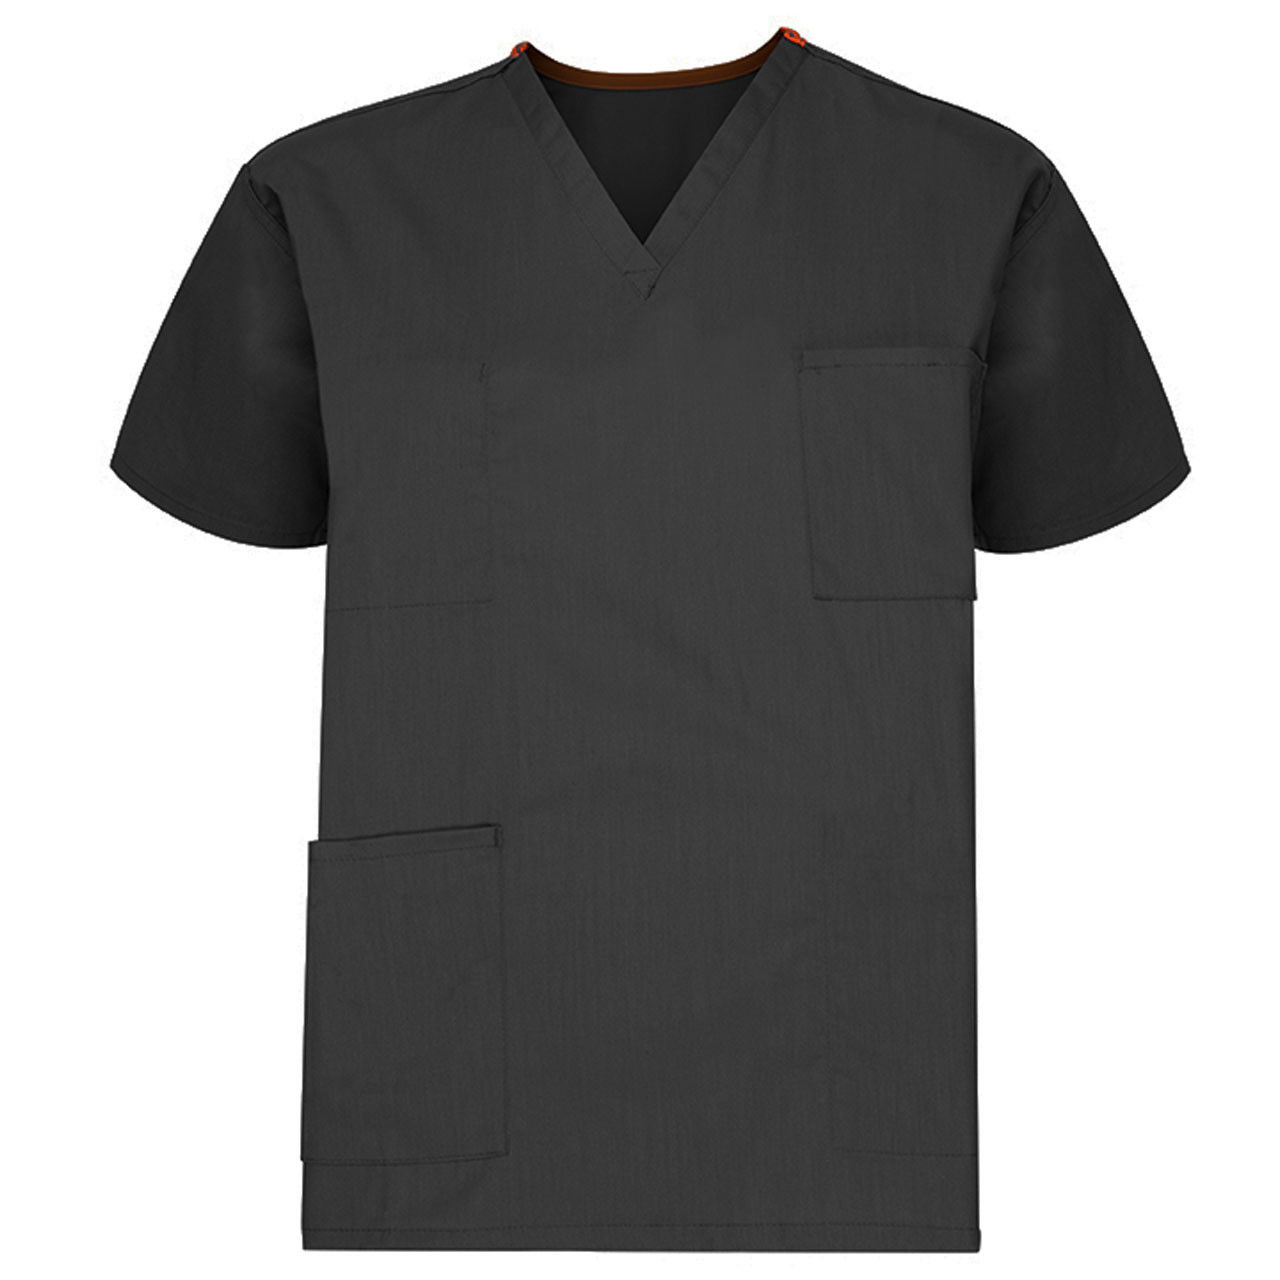 Can you describe the features of these reversible scrubs, Unisex Reversible Scrub Top, Black - Case of 24?